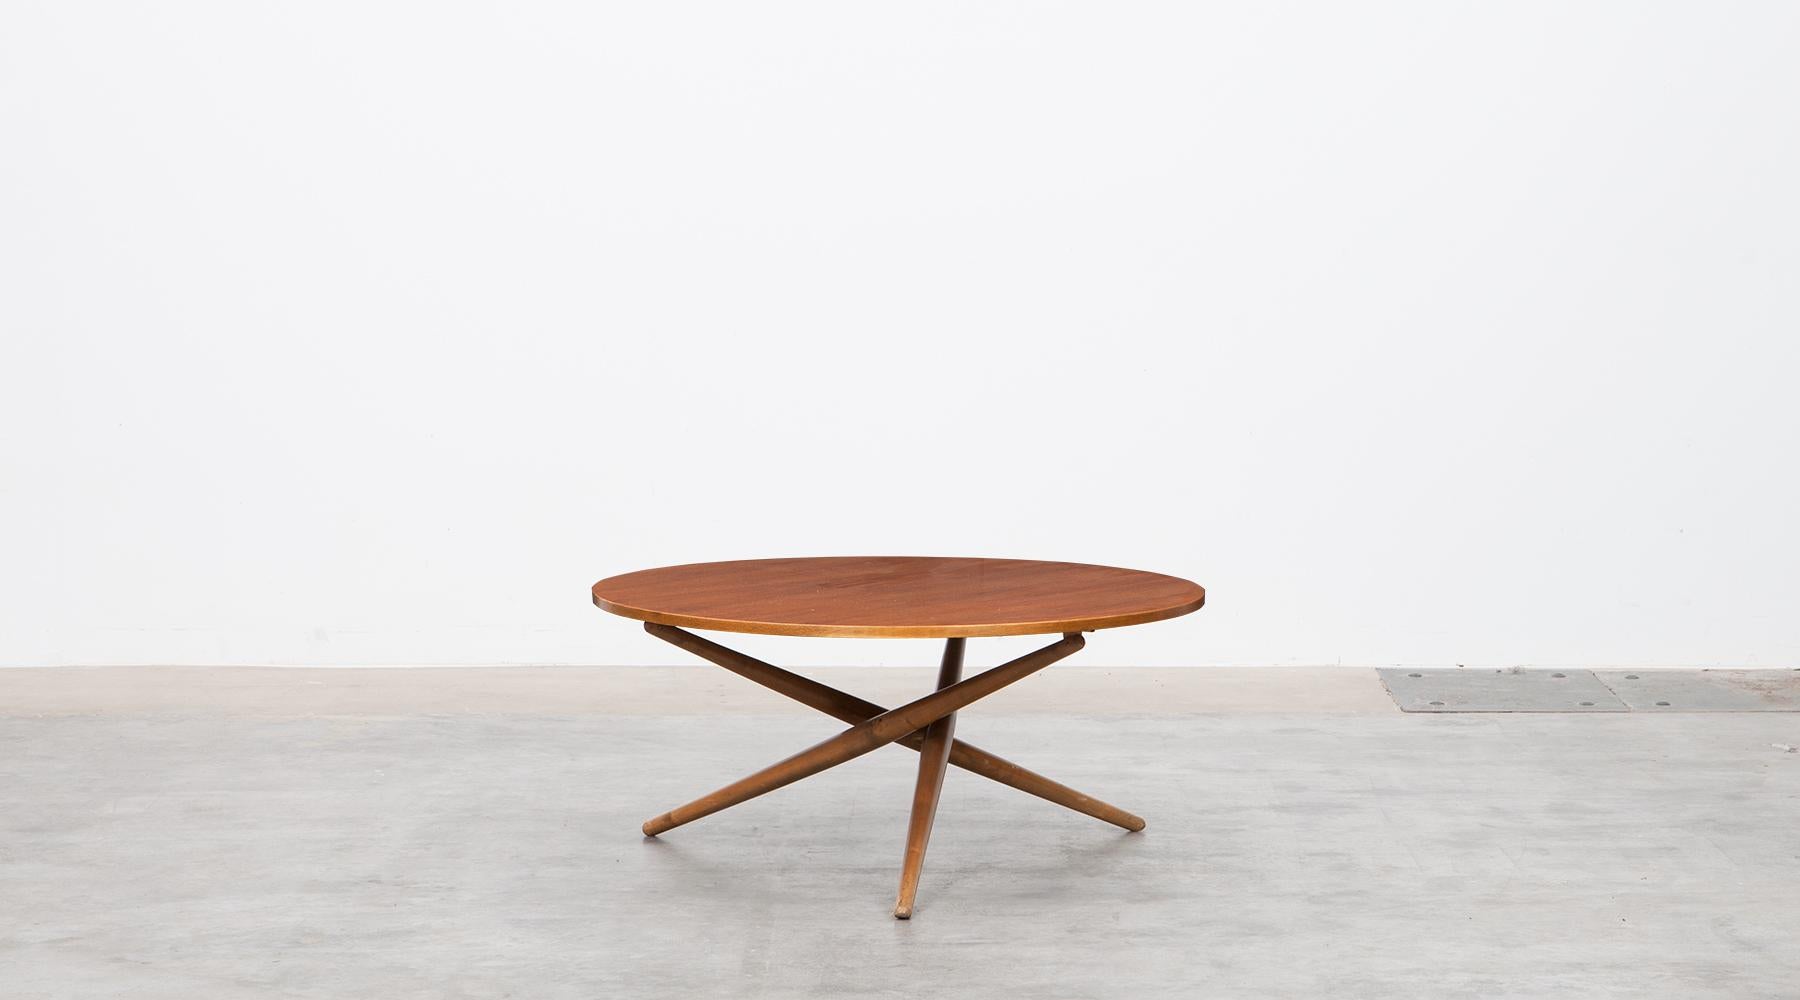 Eat and tea table with tabletop in walnut by Jürg Bally, Switzerland, 1951.

Iconic slim and graceful wooden eat and tea table by Swiss Jürg Bally from 1951. Walnut tabletop. This model strongly reminds of a 1955 side table by US designer T.H.